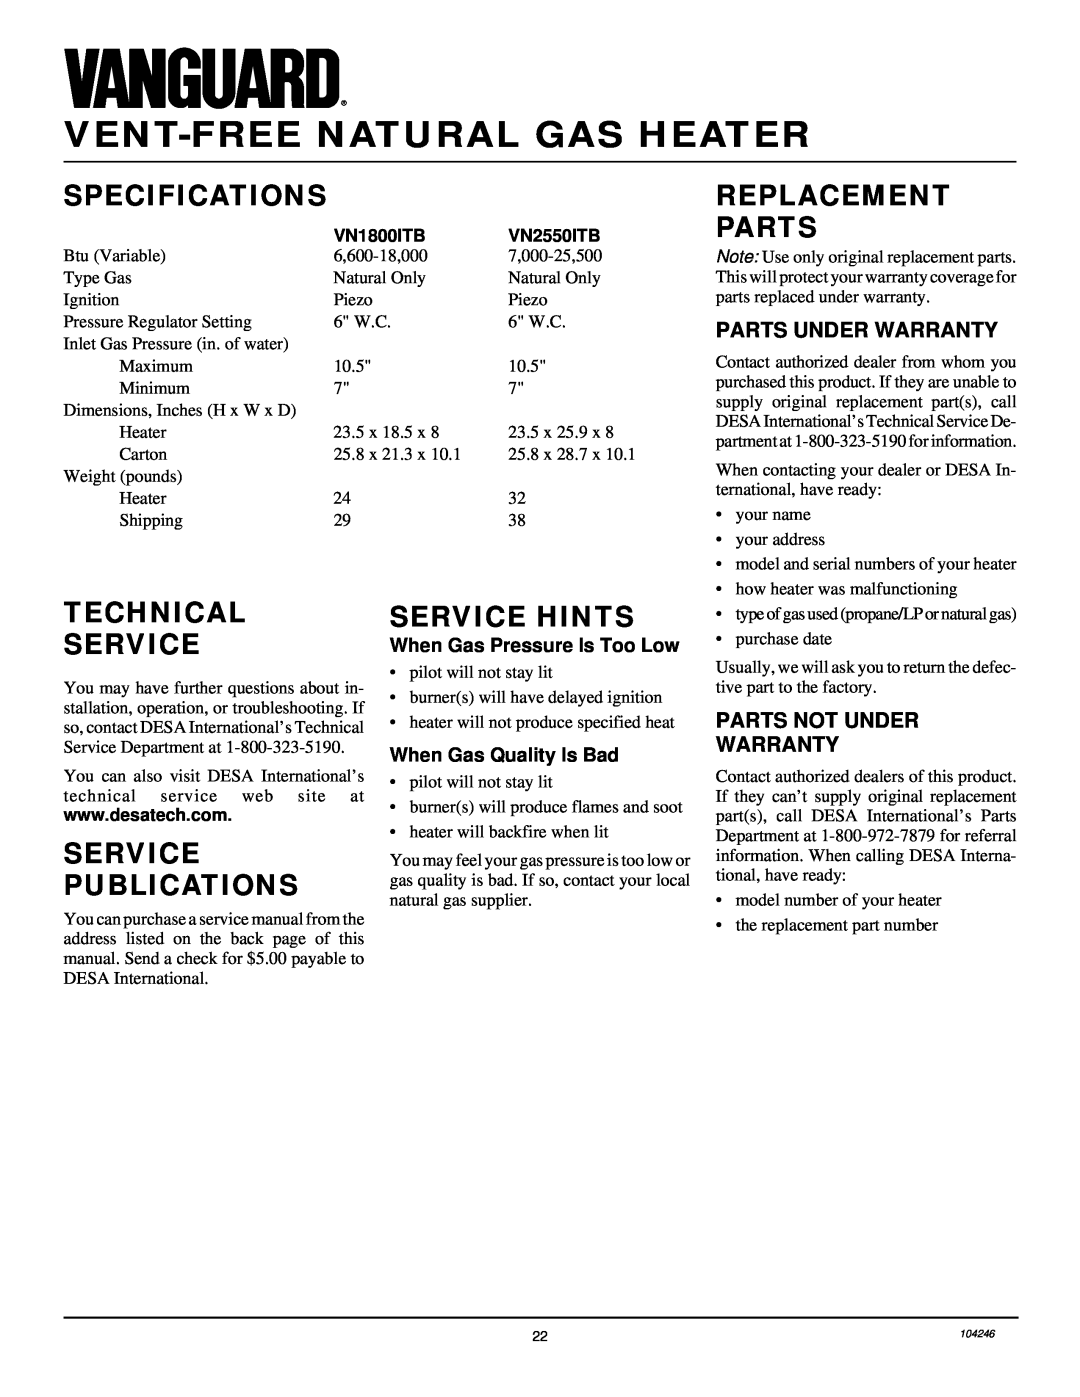 Vanguard Heating VN2550ITB Specifications, Replacement Parts, Technical Service, Service Hints, Service Publications 